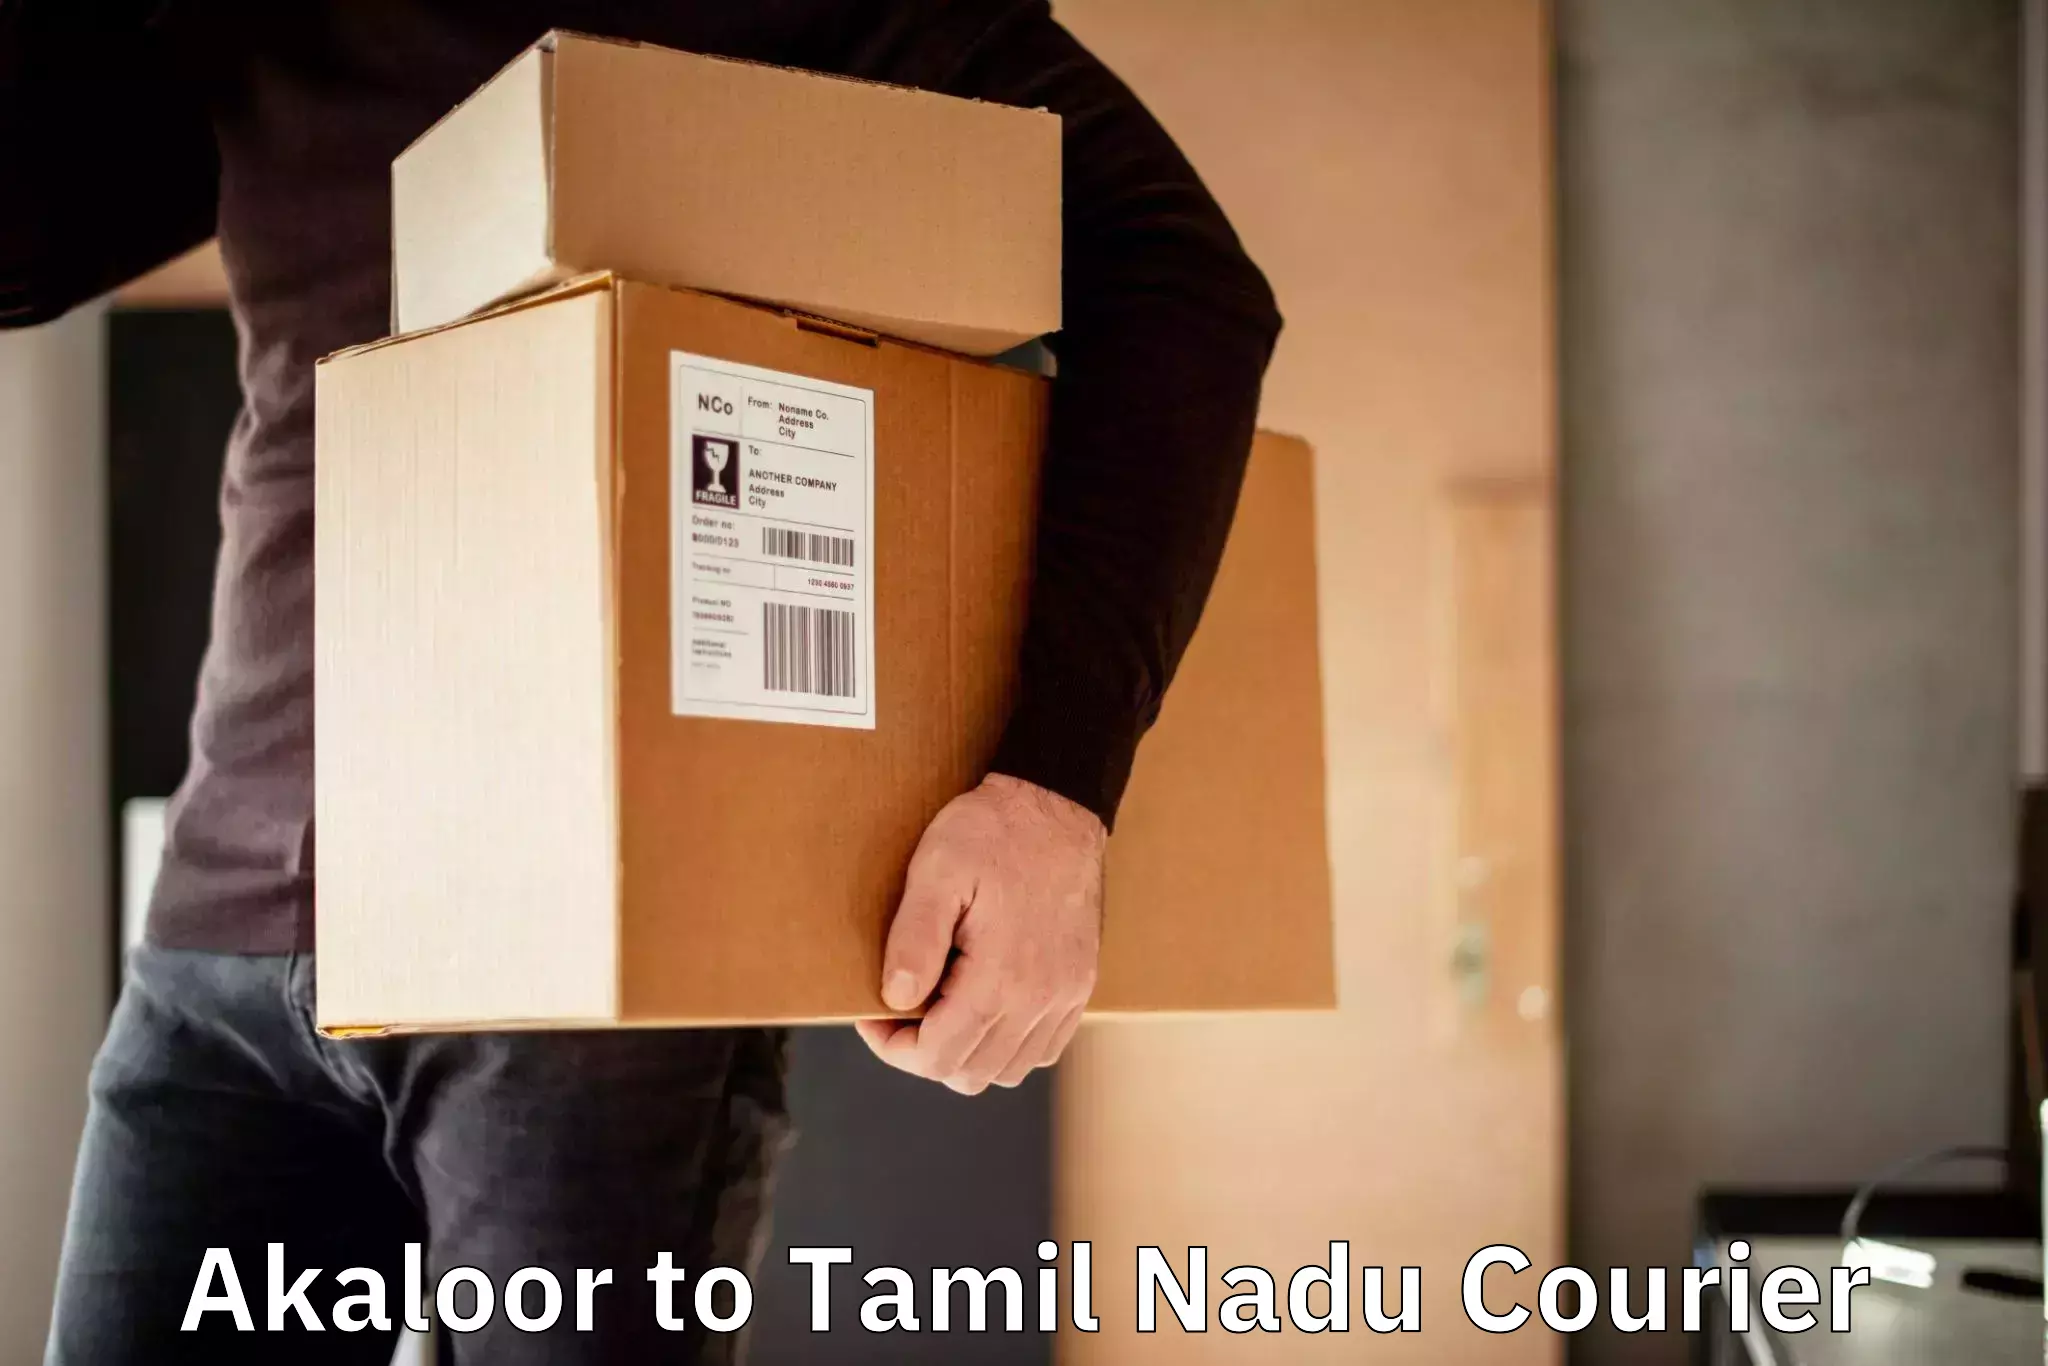 Flexible delivery schedules Akaloor to Vellore